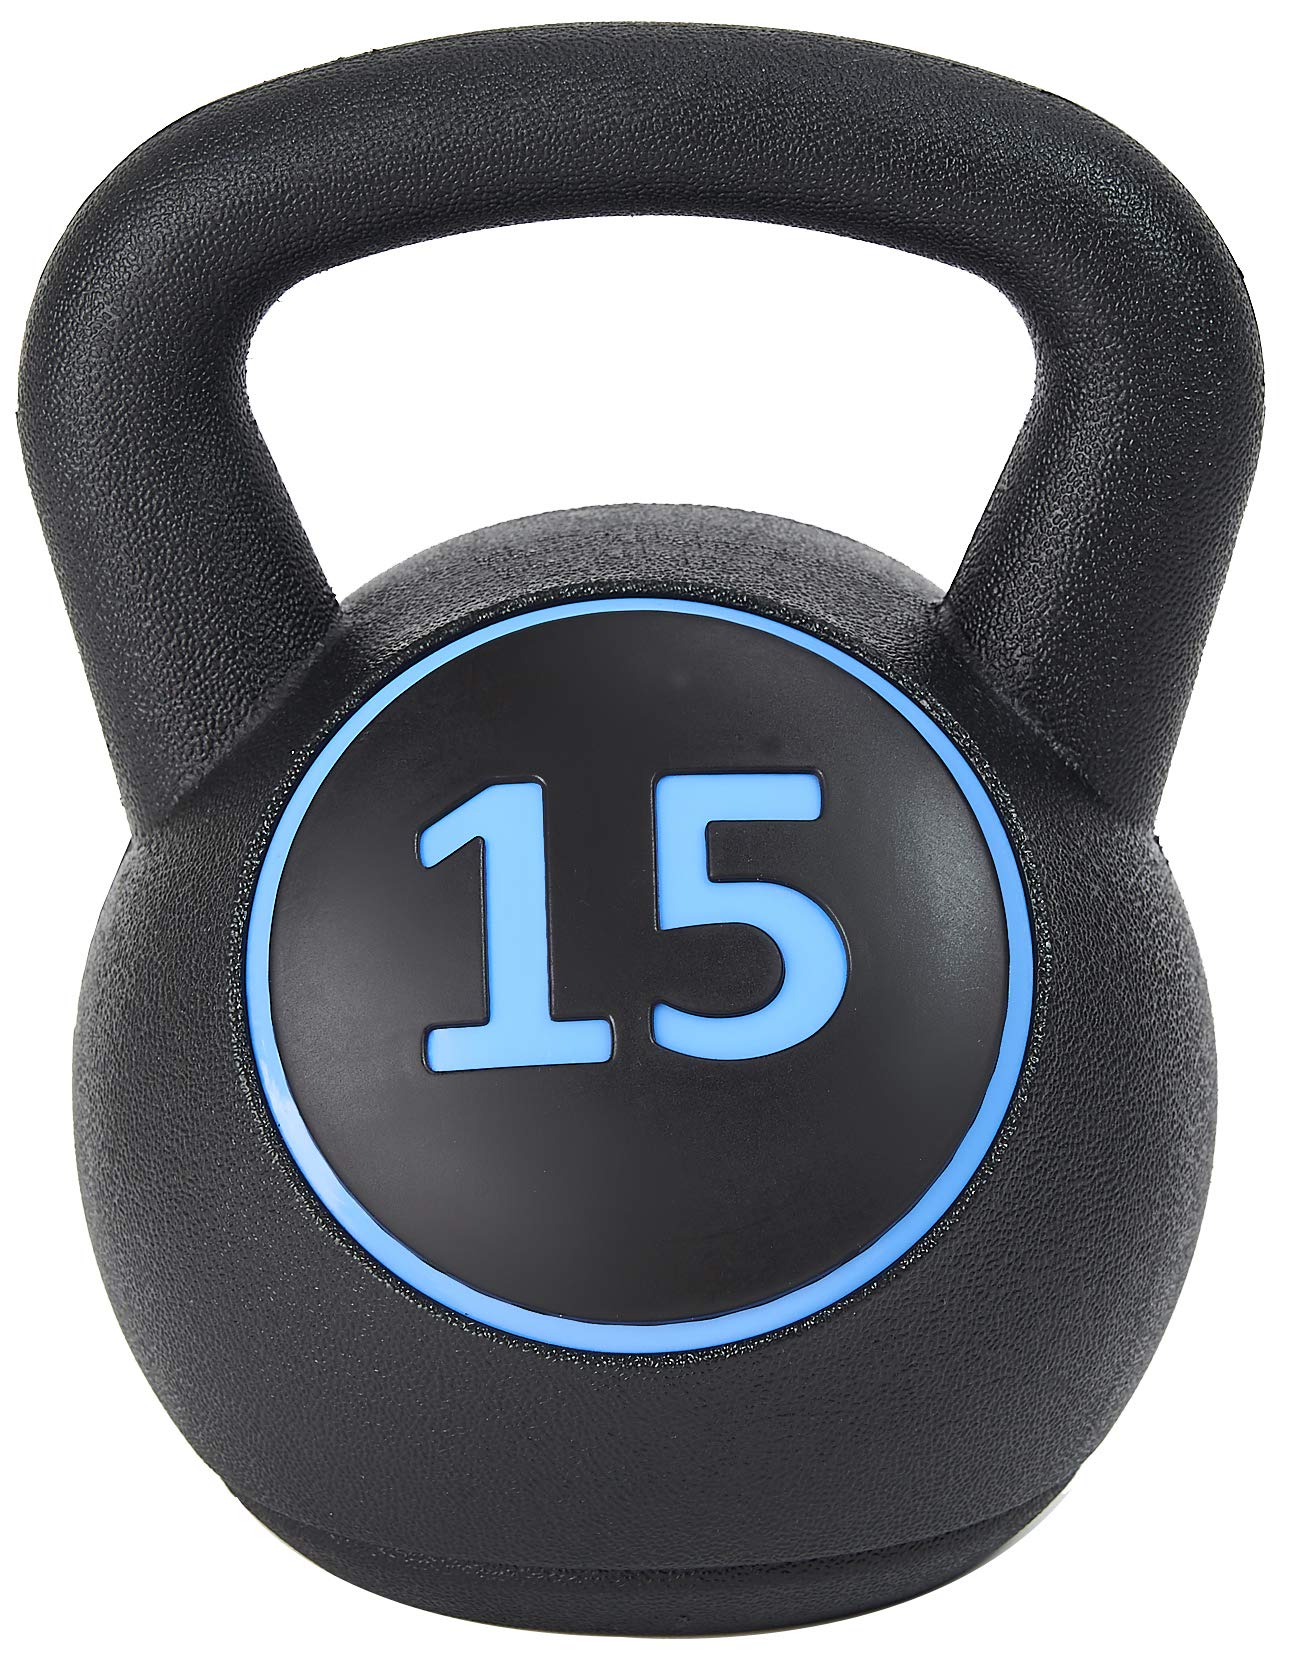 BalanceFrom Wide Grip Kettlebell Exercise Fitness Weight Set